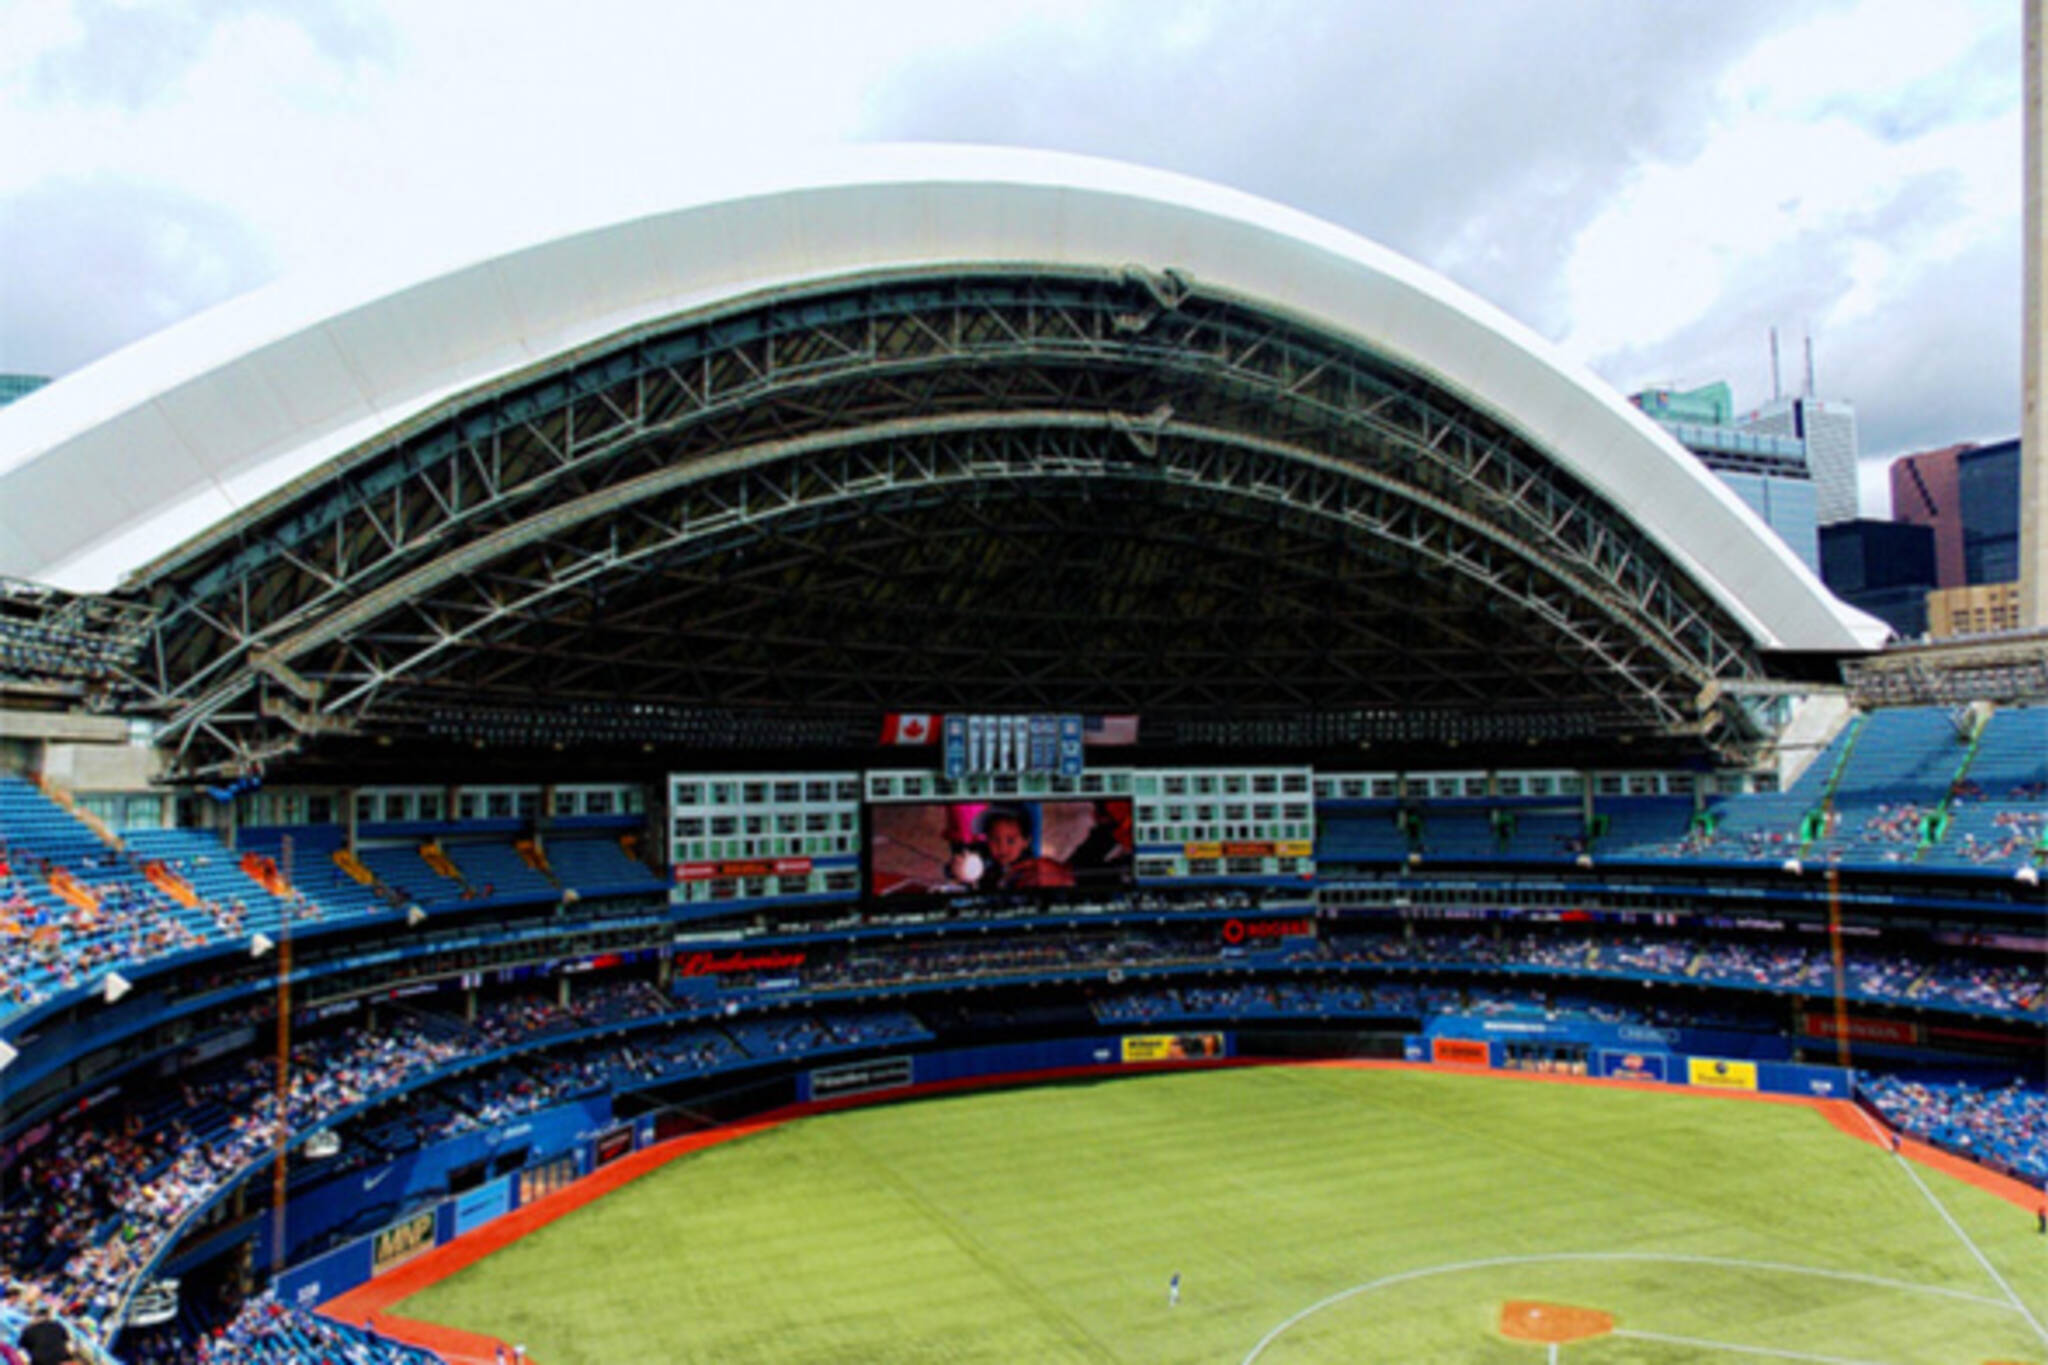 Rogers Centre roof open for the first time this season